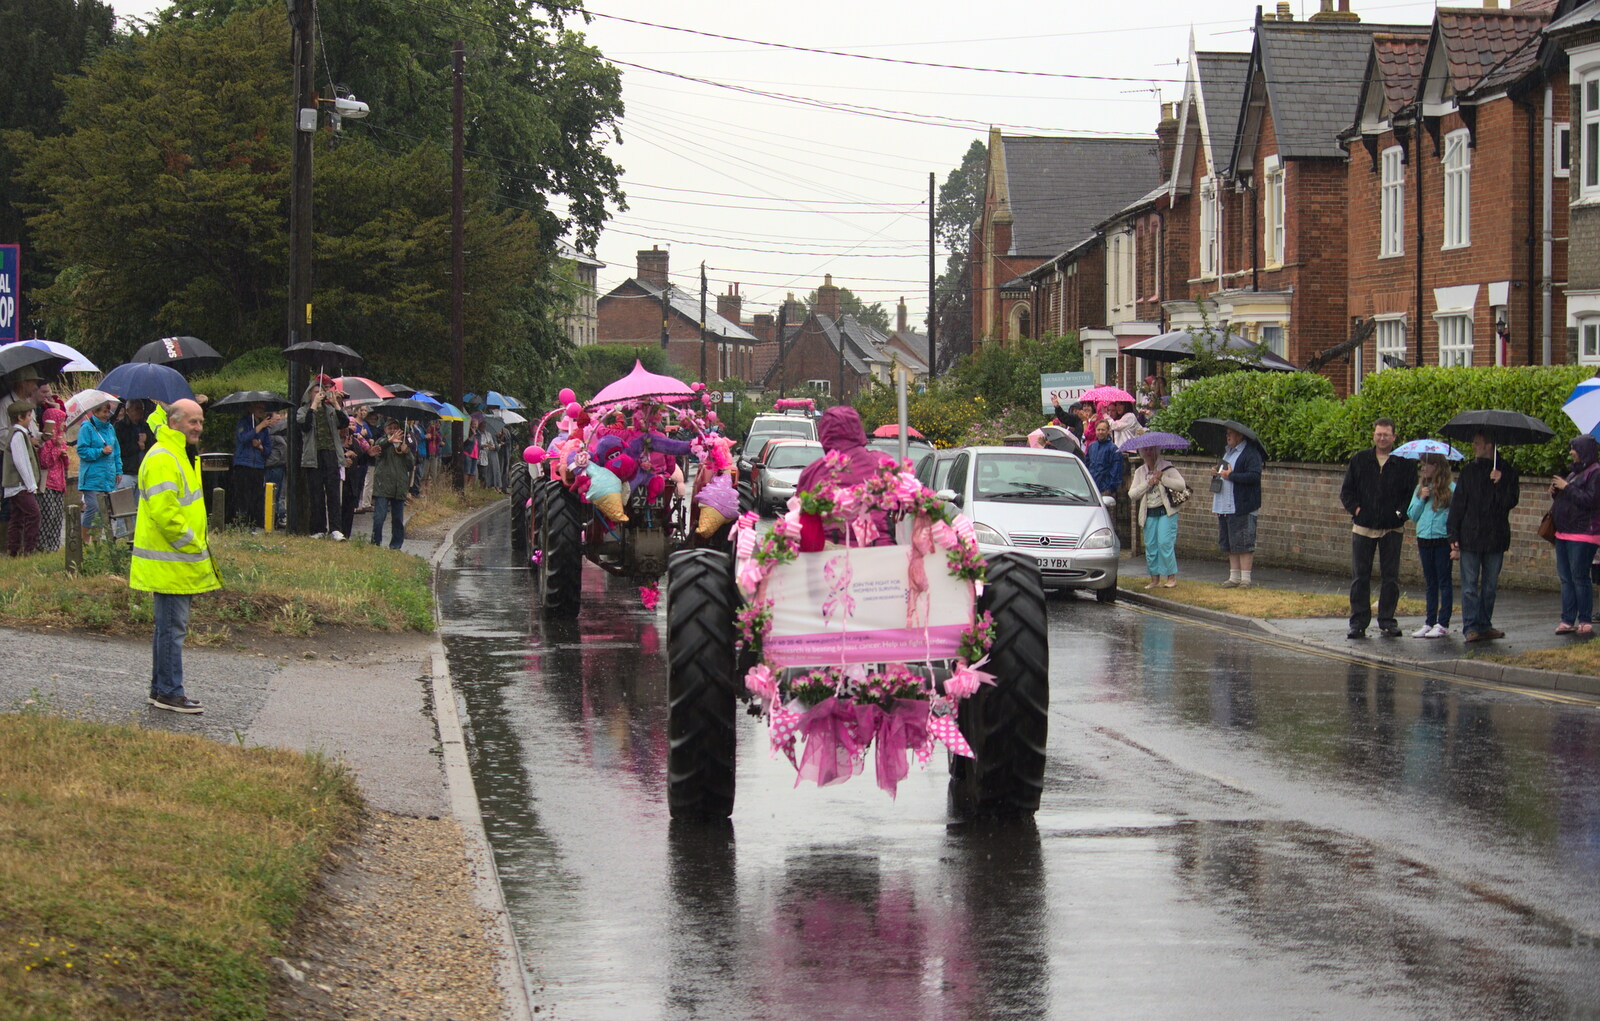 Tractors head into Harleston from The Pink Ladies Tractor Run, Harleston and Gawdy Park, Norfolk - 5th July 2015